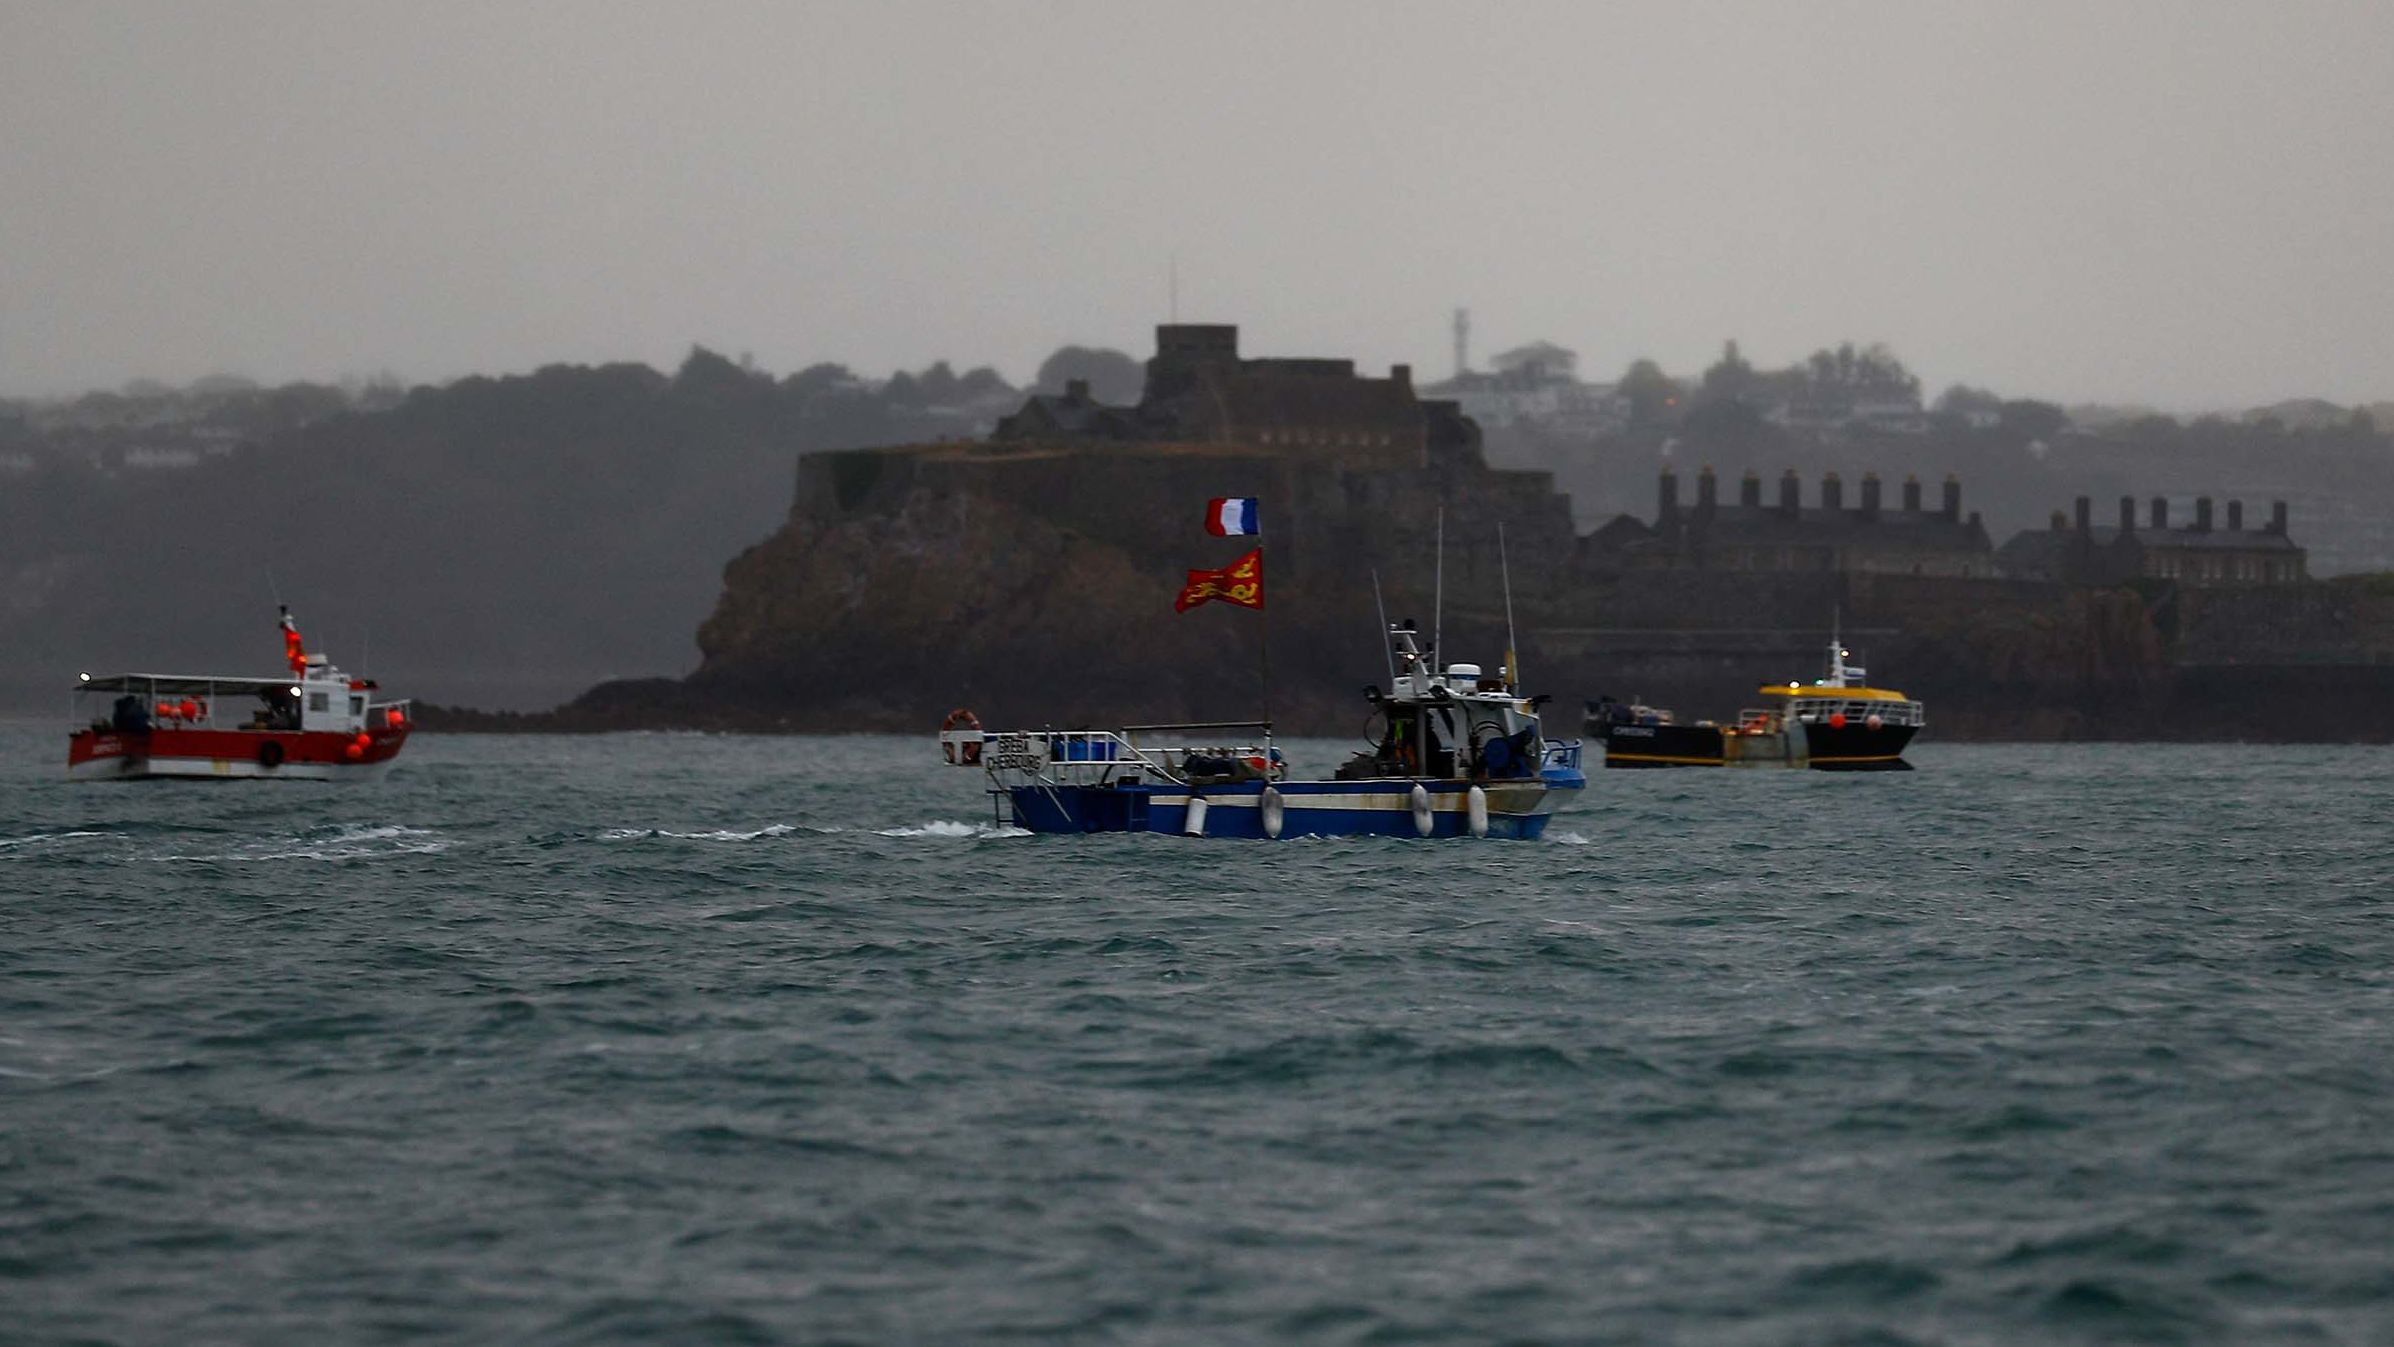 French fishing boats protest over fishing rights near the Jersey port of Saint Helier on Thursday, May 6.